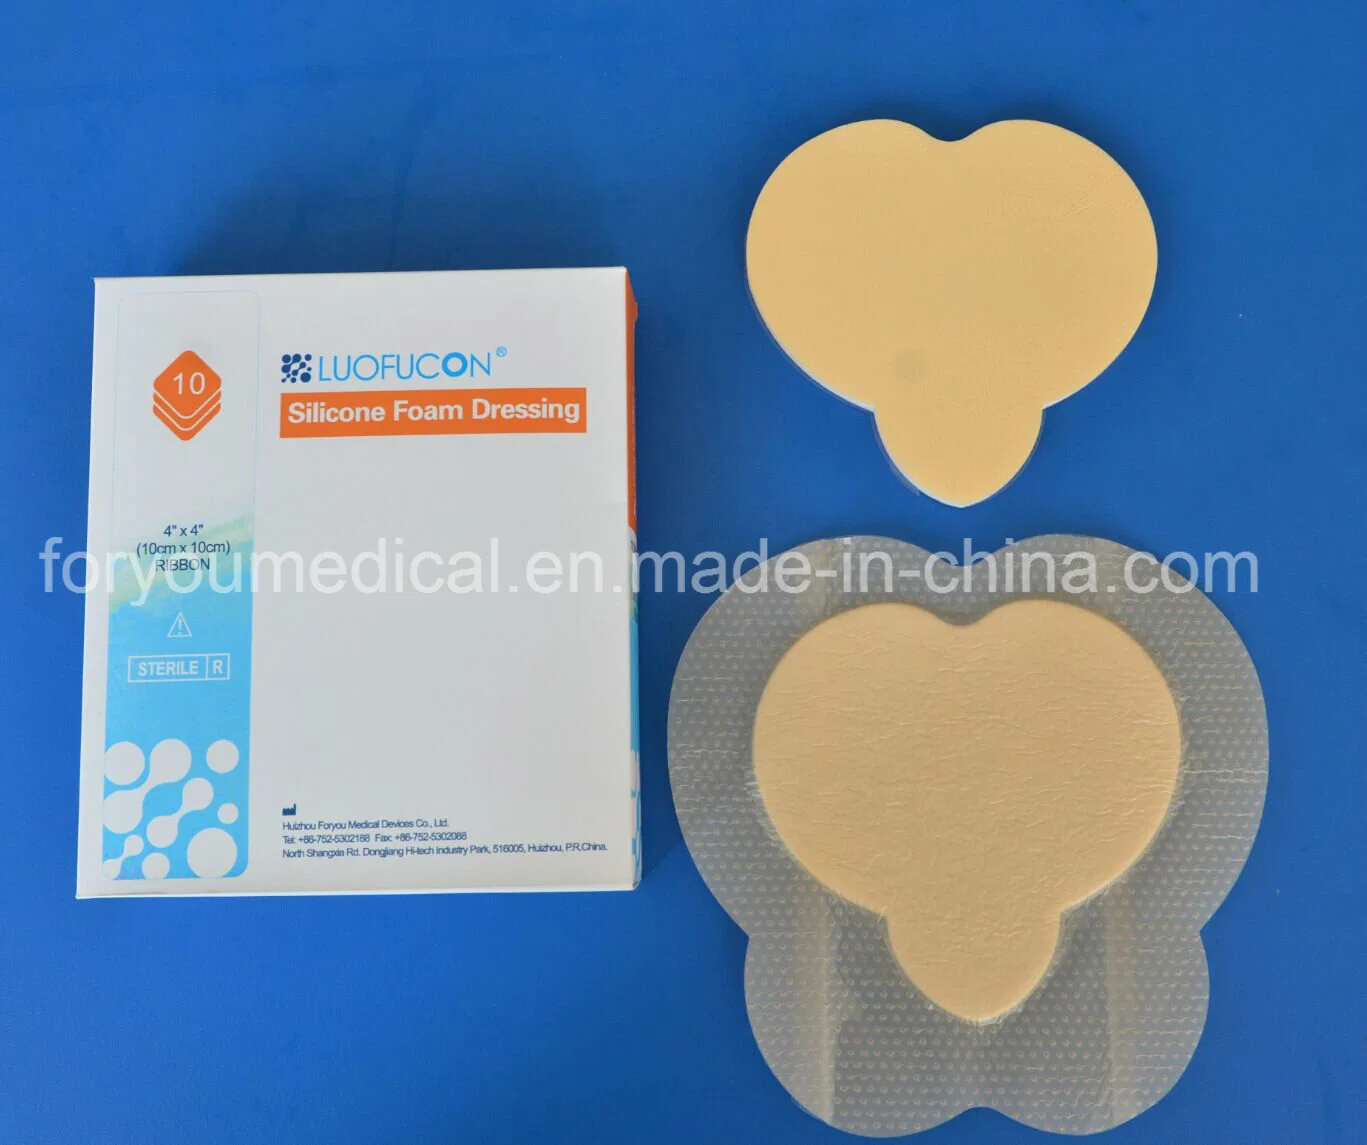 Foryou Medical 2016 FDA Wound Care Dressing Medical Supplies Self-Adhesive Healing Wound Silicone Foam Dressing